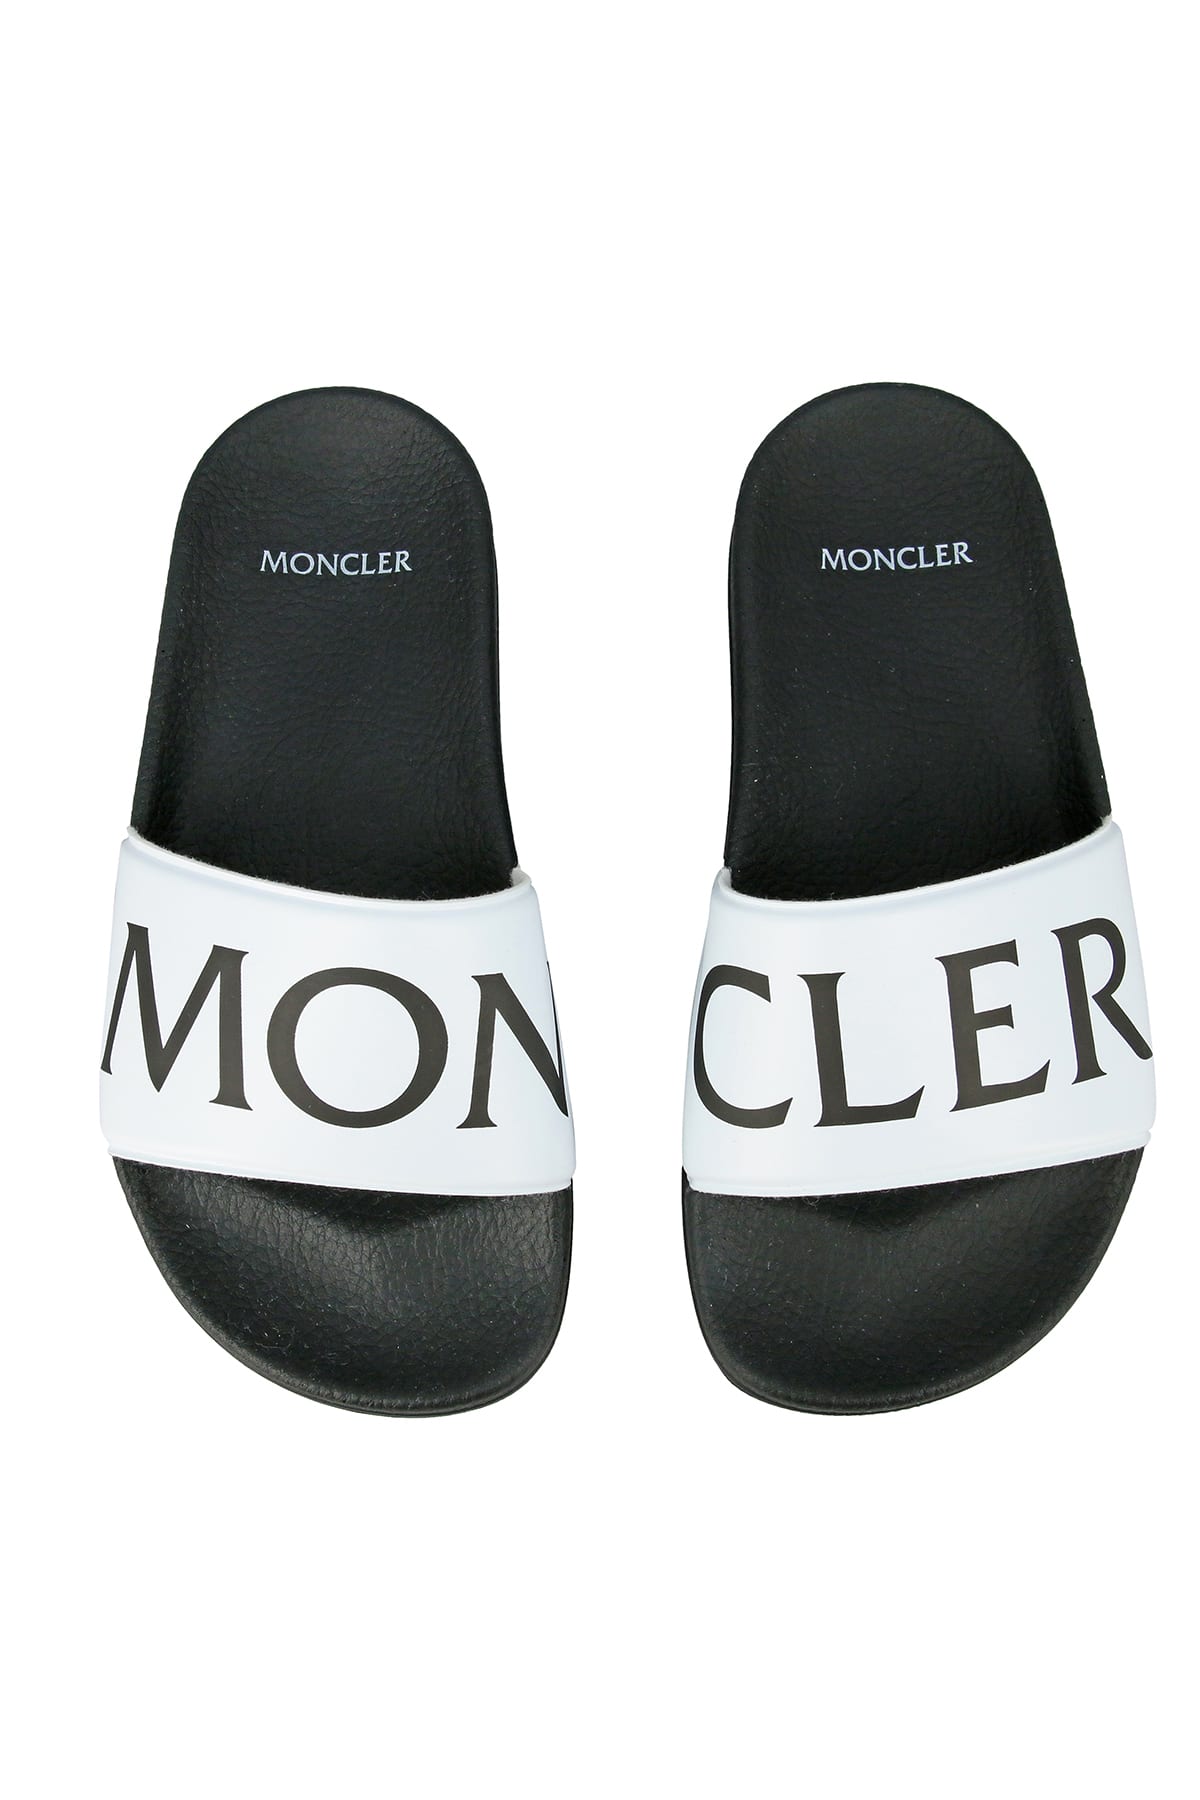 Moncler Shoes | italist, ALWAYS LIKE A SALE